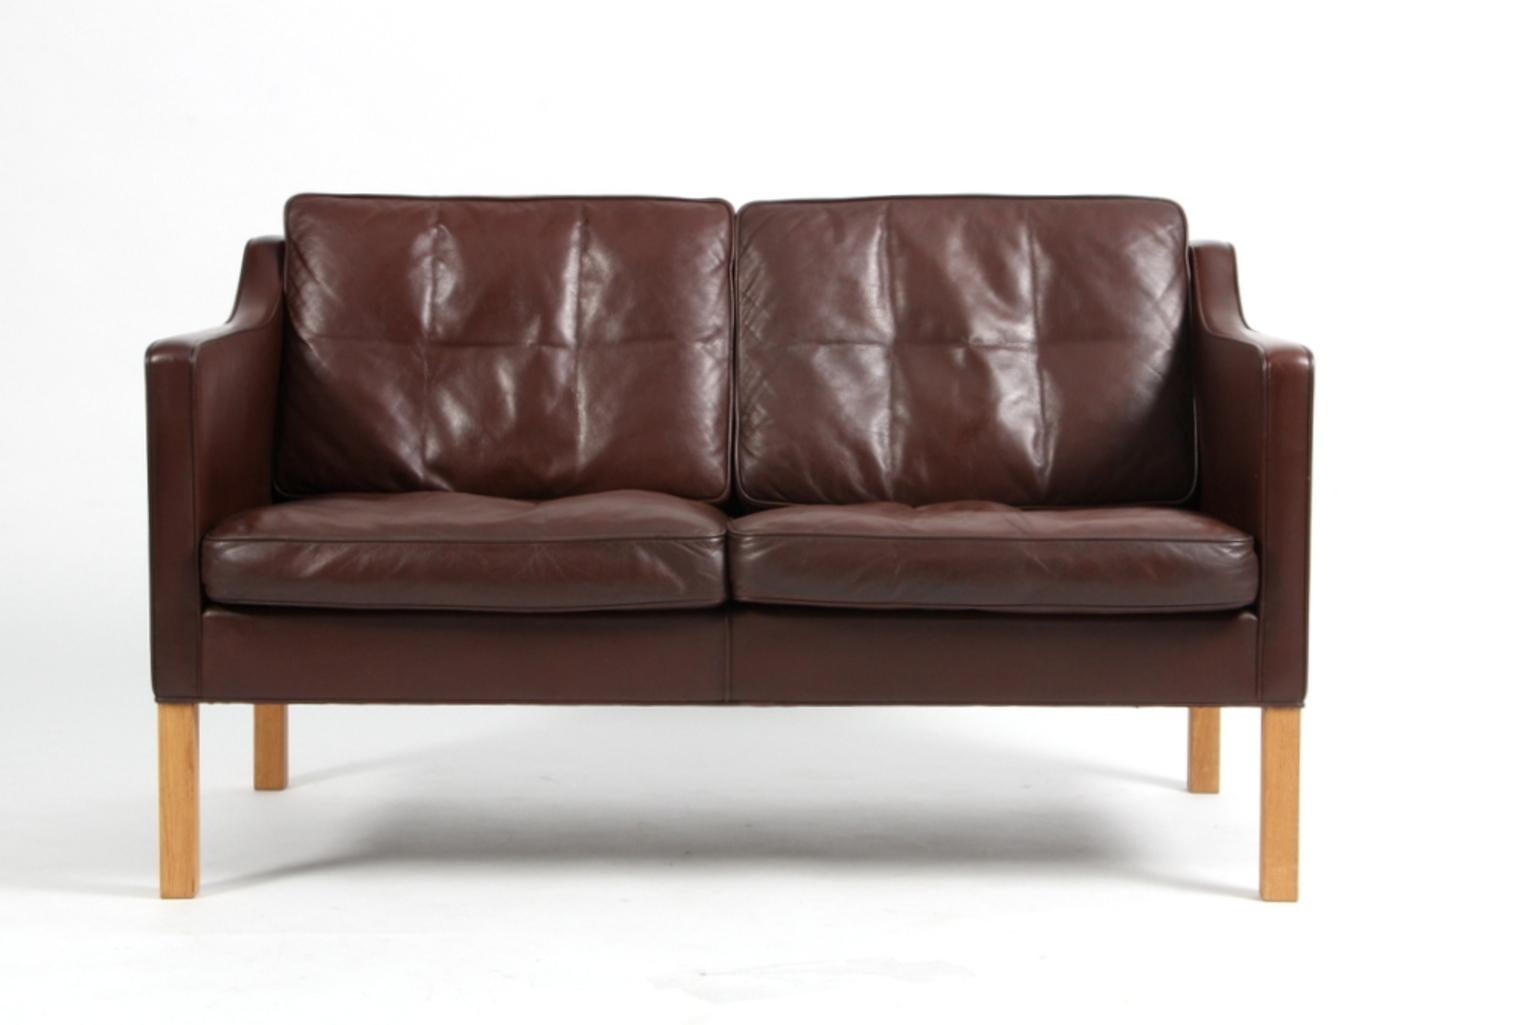 Børge Mogensen two-seat sofa original upholstered with brown leather.

Legs of oak.

Model 2322, made by Fredericia Furniture.